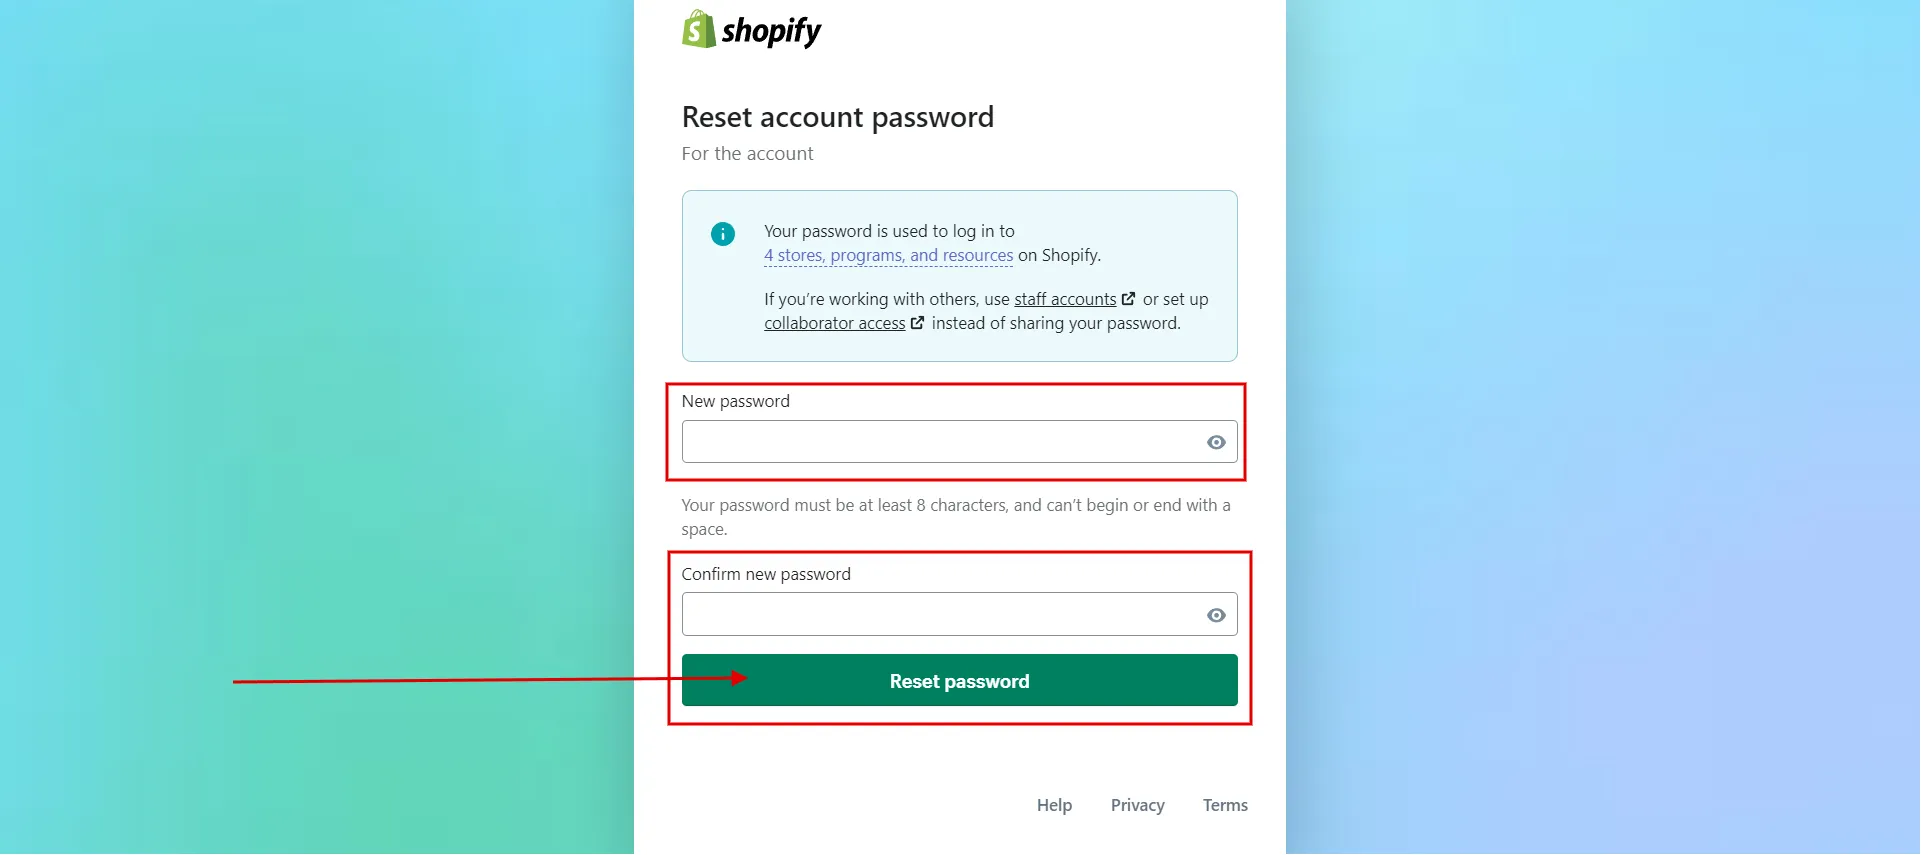 Add new password and confirm it